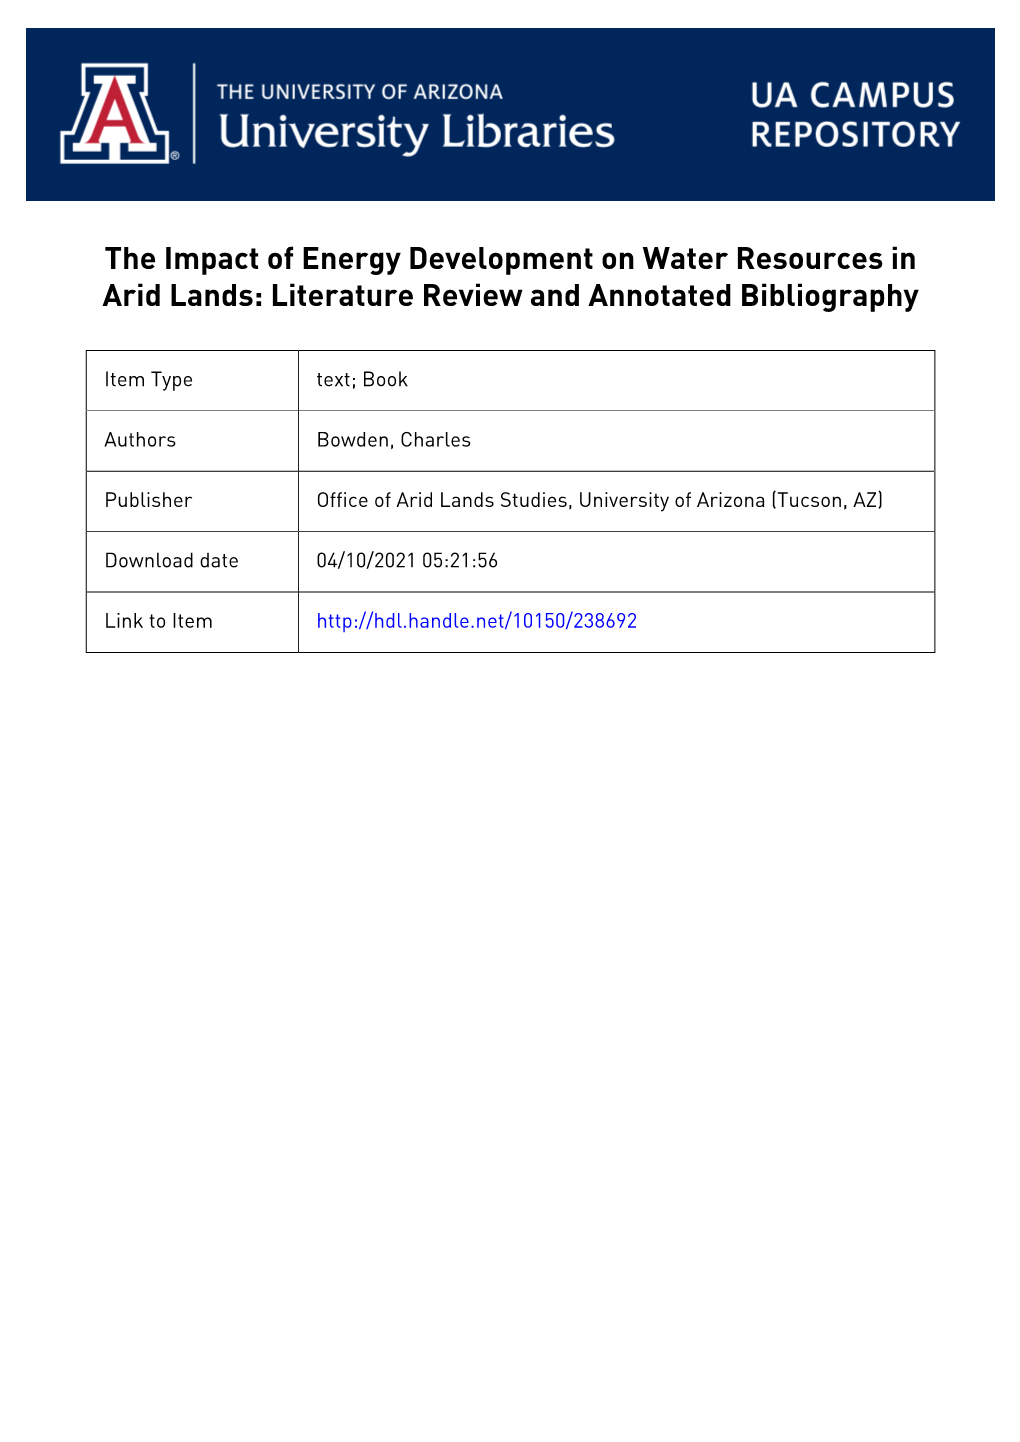 Impact of Energy Development on Water Resources in Arid Lands: Literature Review and Annotated Bibliography